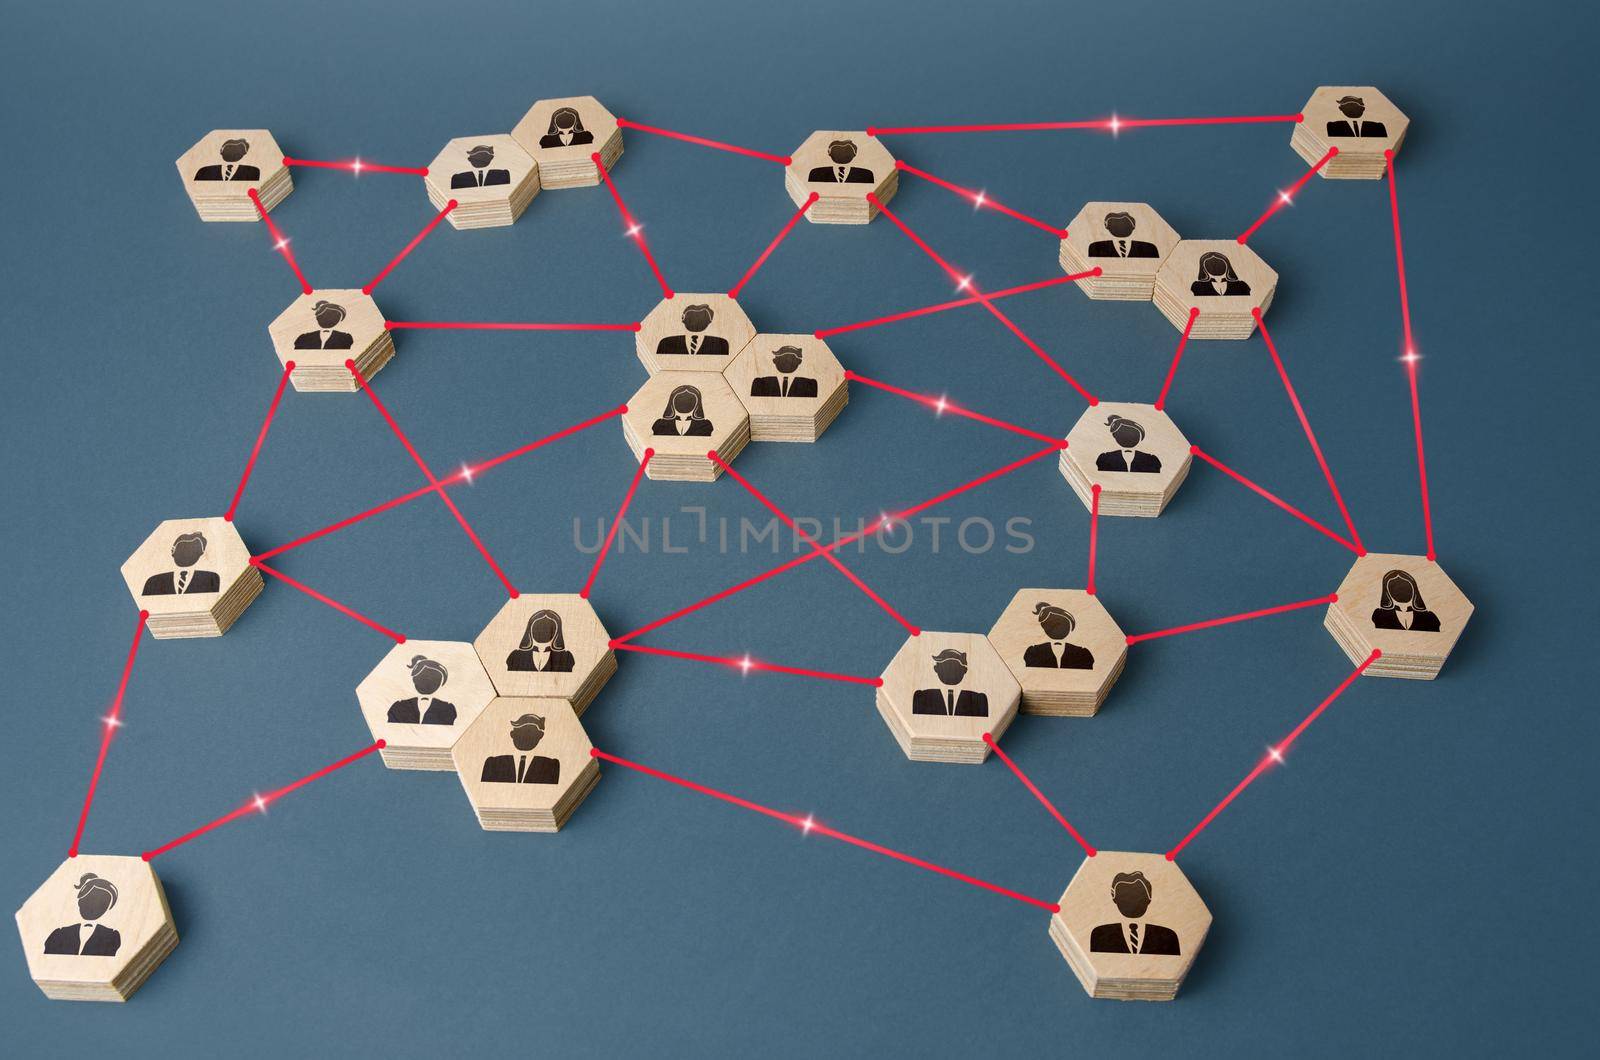 Connected people. Interactions between employees and working groups. Networking communication. Decentralized hierarchical system of company. Partnerships, business connections. Organization concept by iLixe48